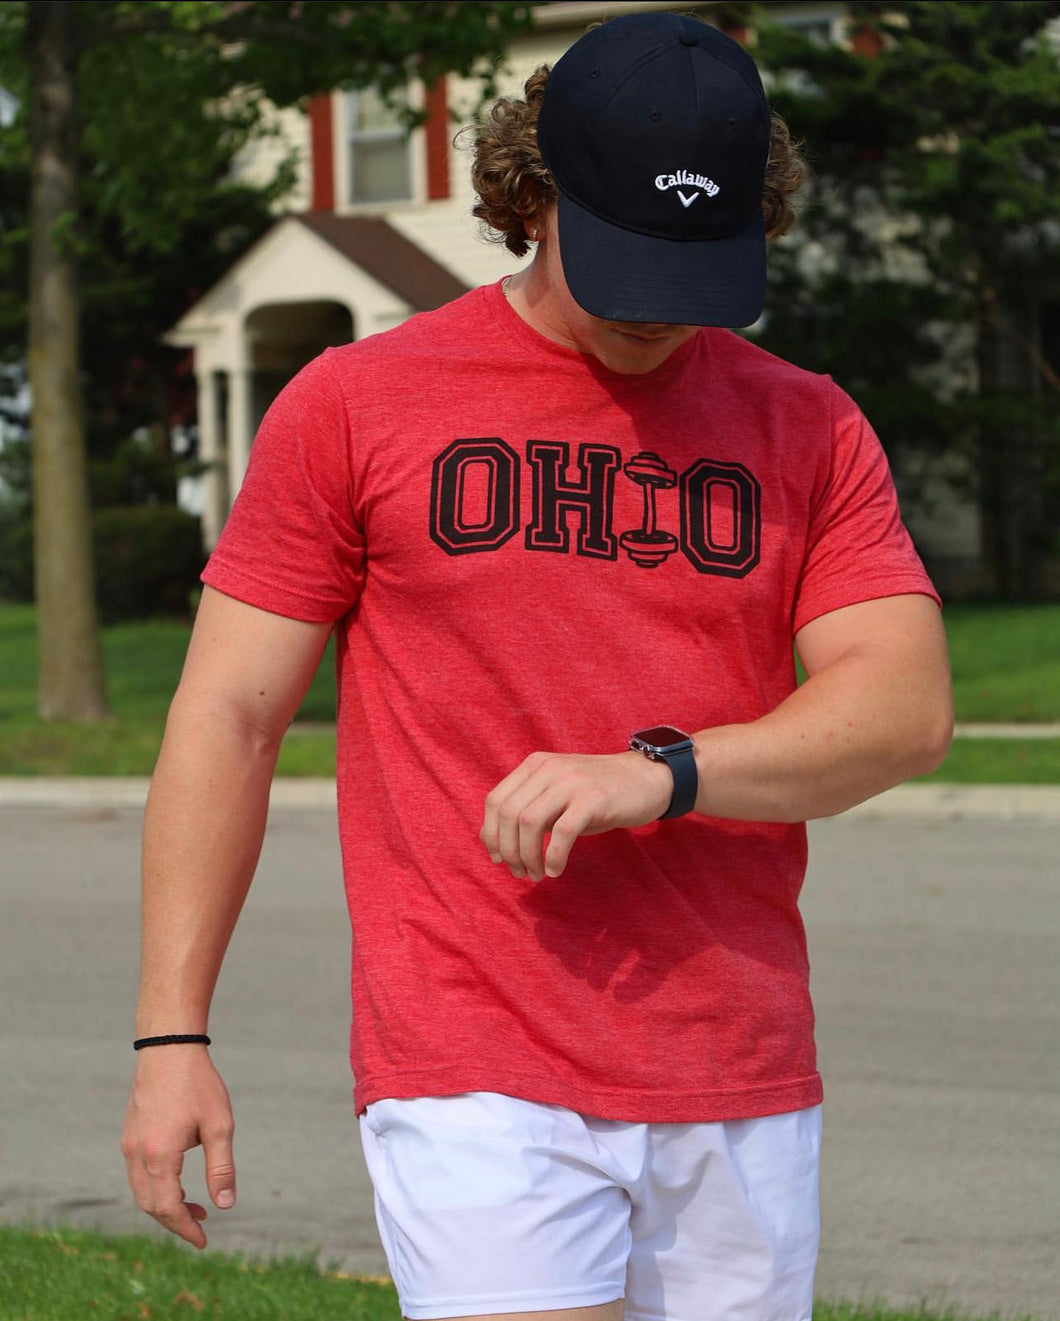 Red with black Ohio letters